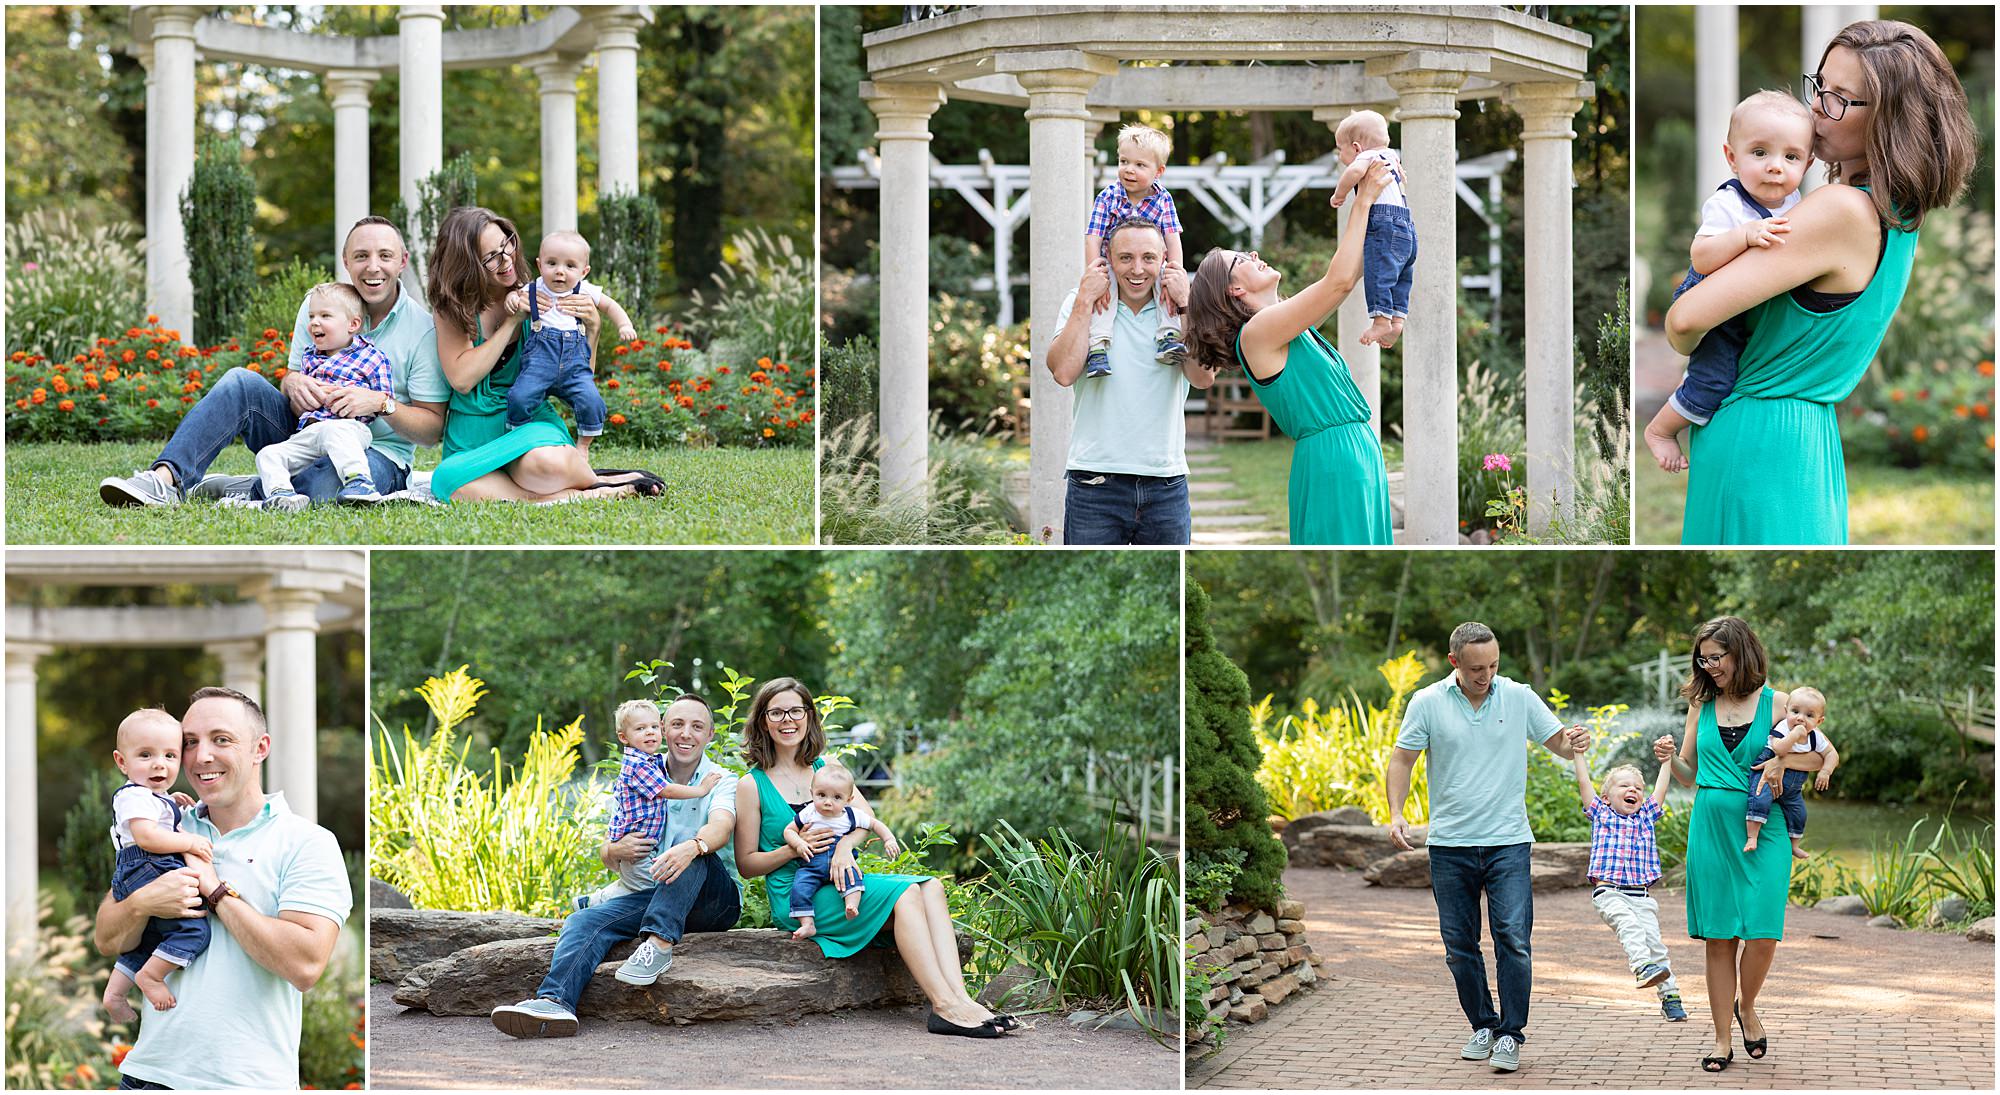 South Jersey holiday family photo sessions photographed at Sayen Gardens